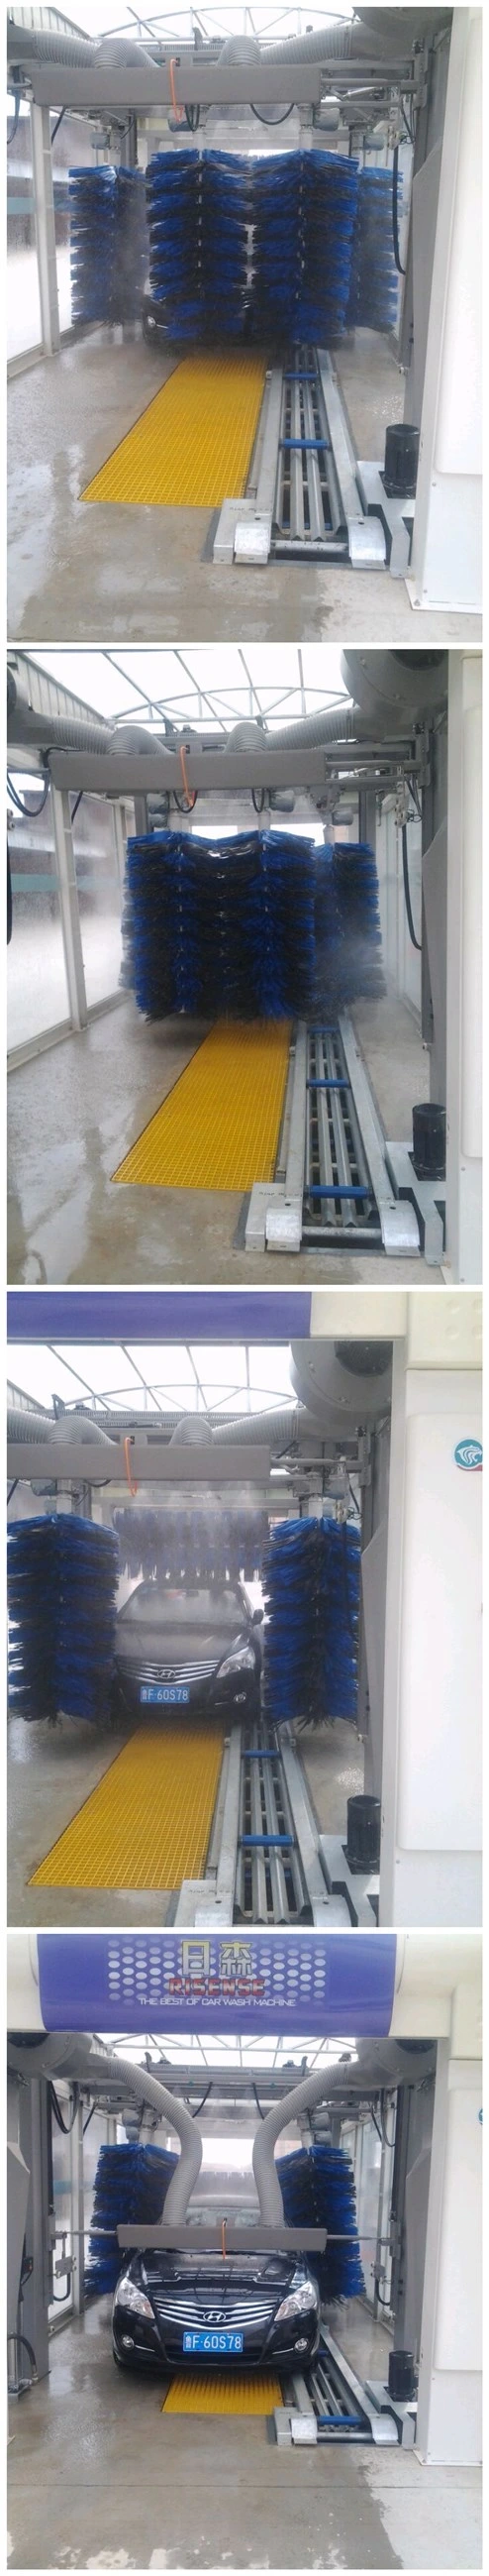 Car Washing Machine Systems Fully Automatic Tunnel Car Washer Supplier in China